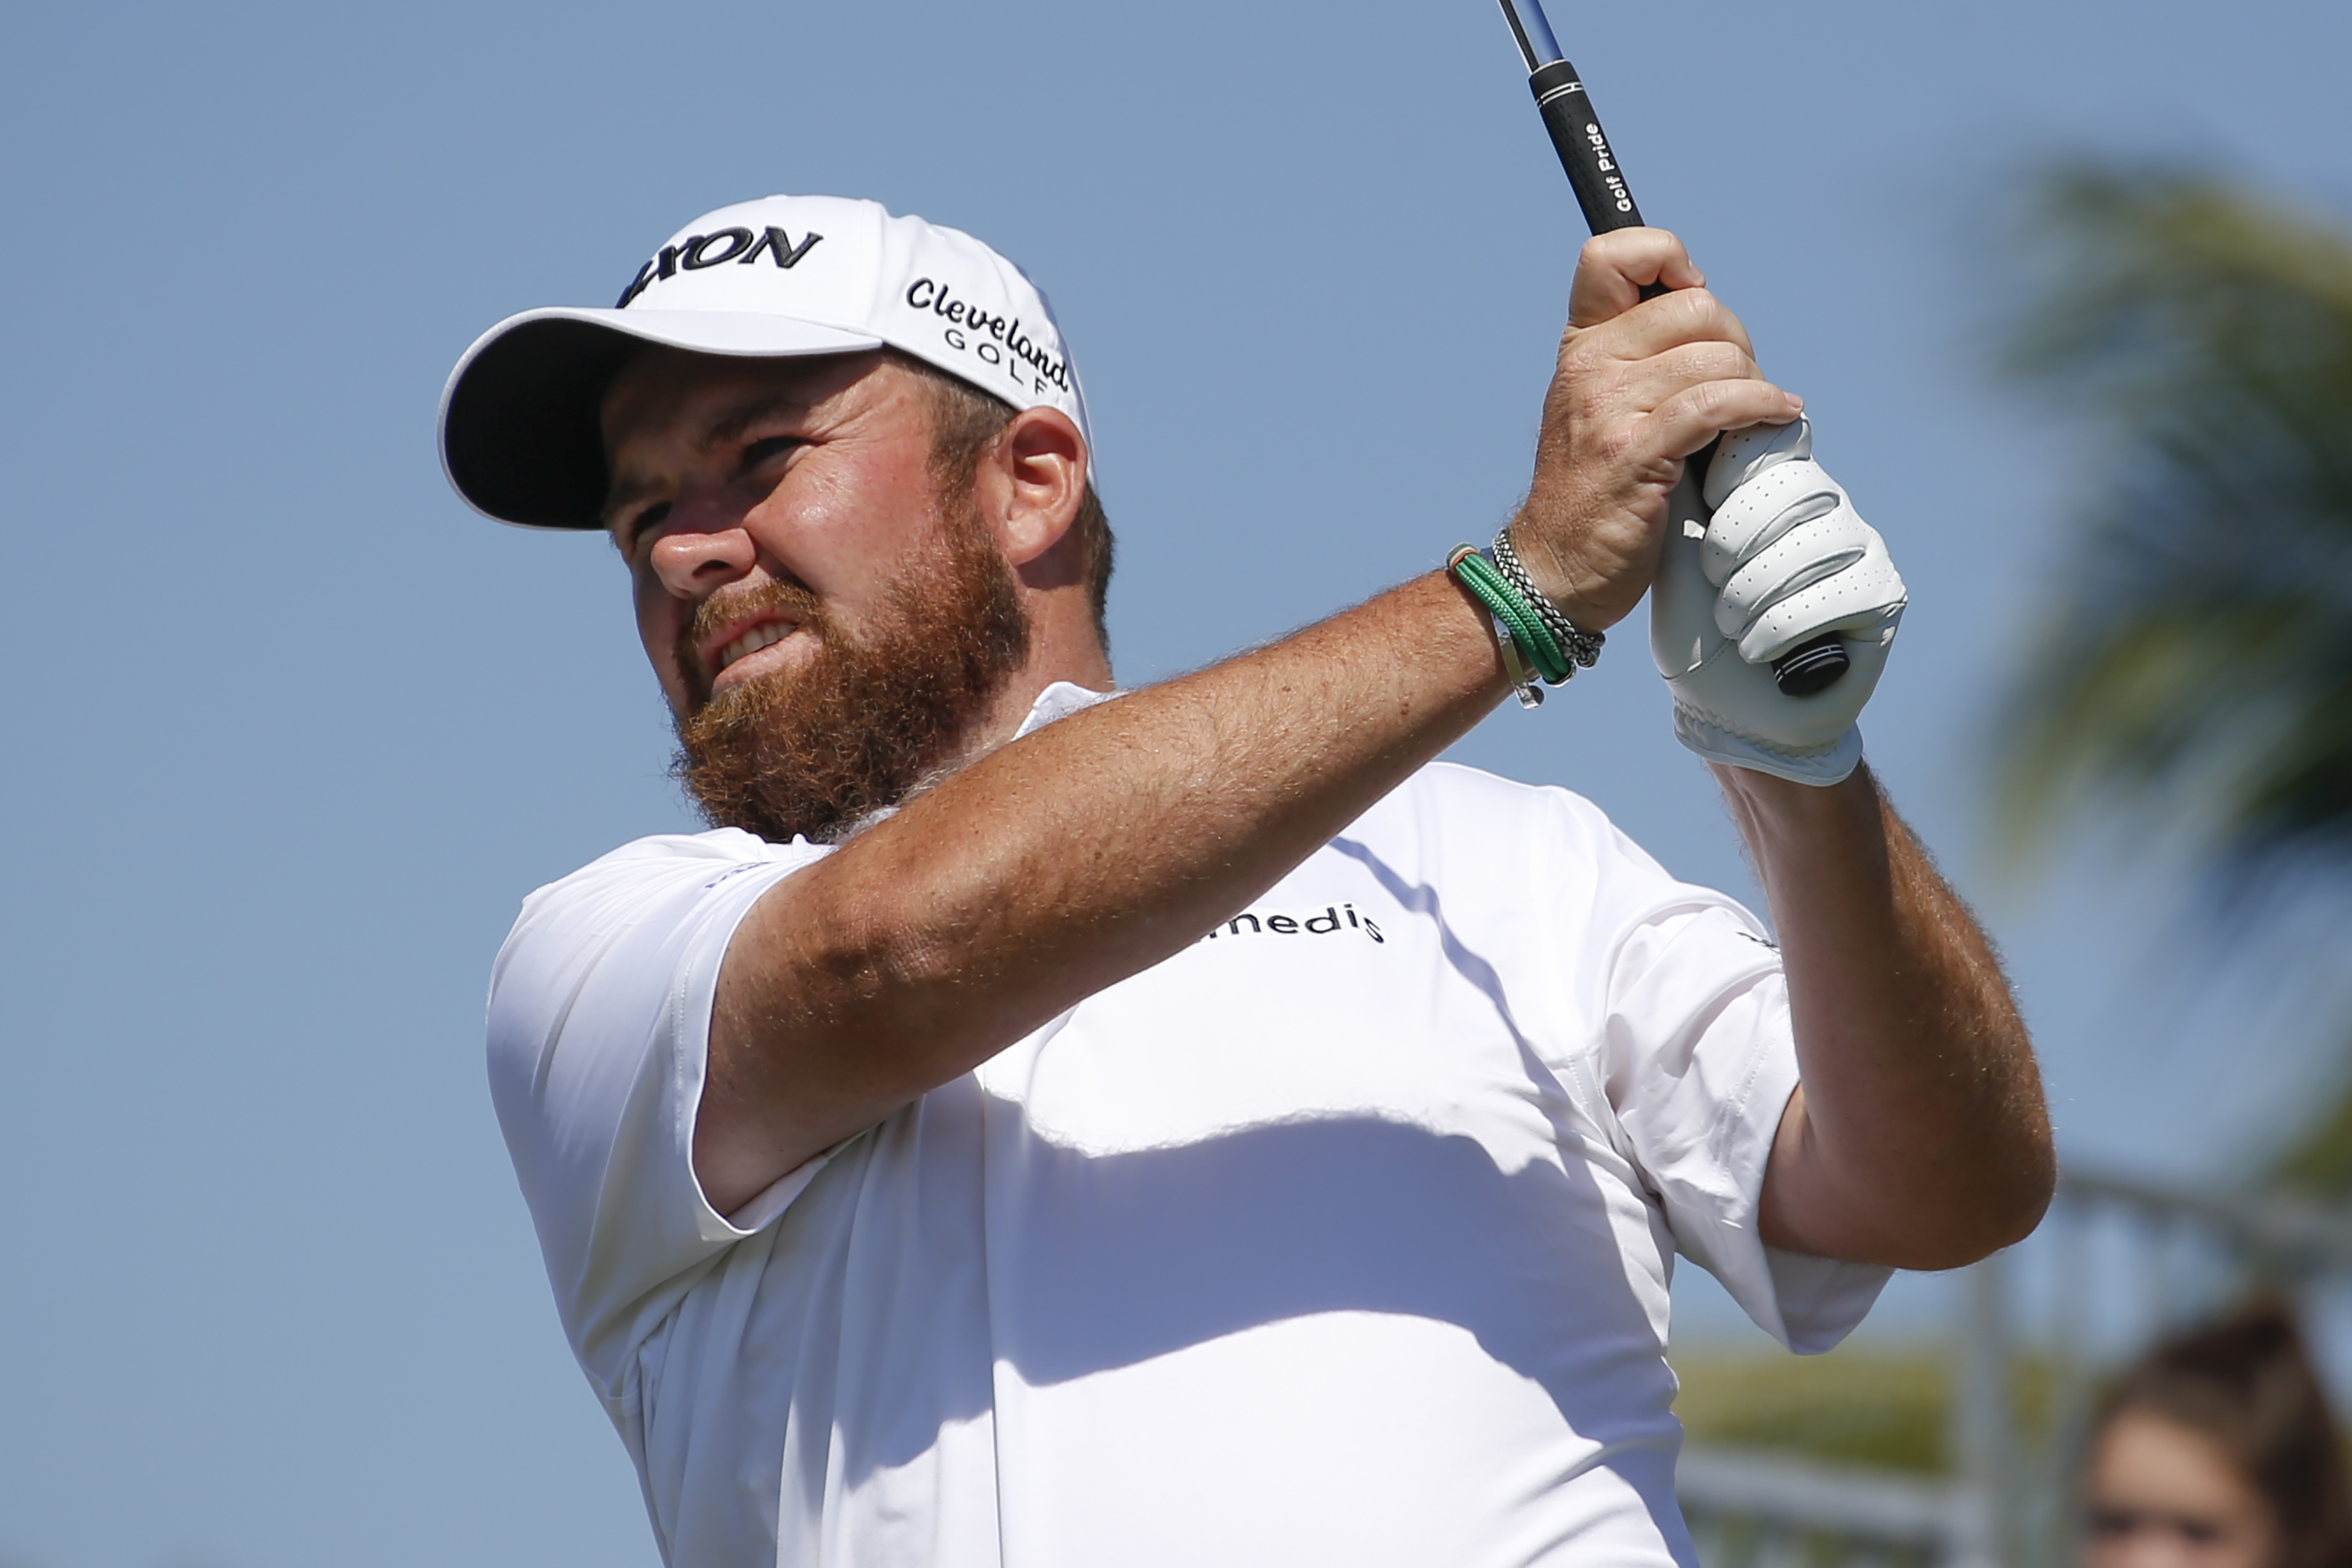 Shane Lowry: Golfers might not get visas due to COVID-19